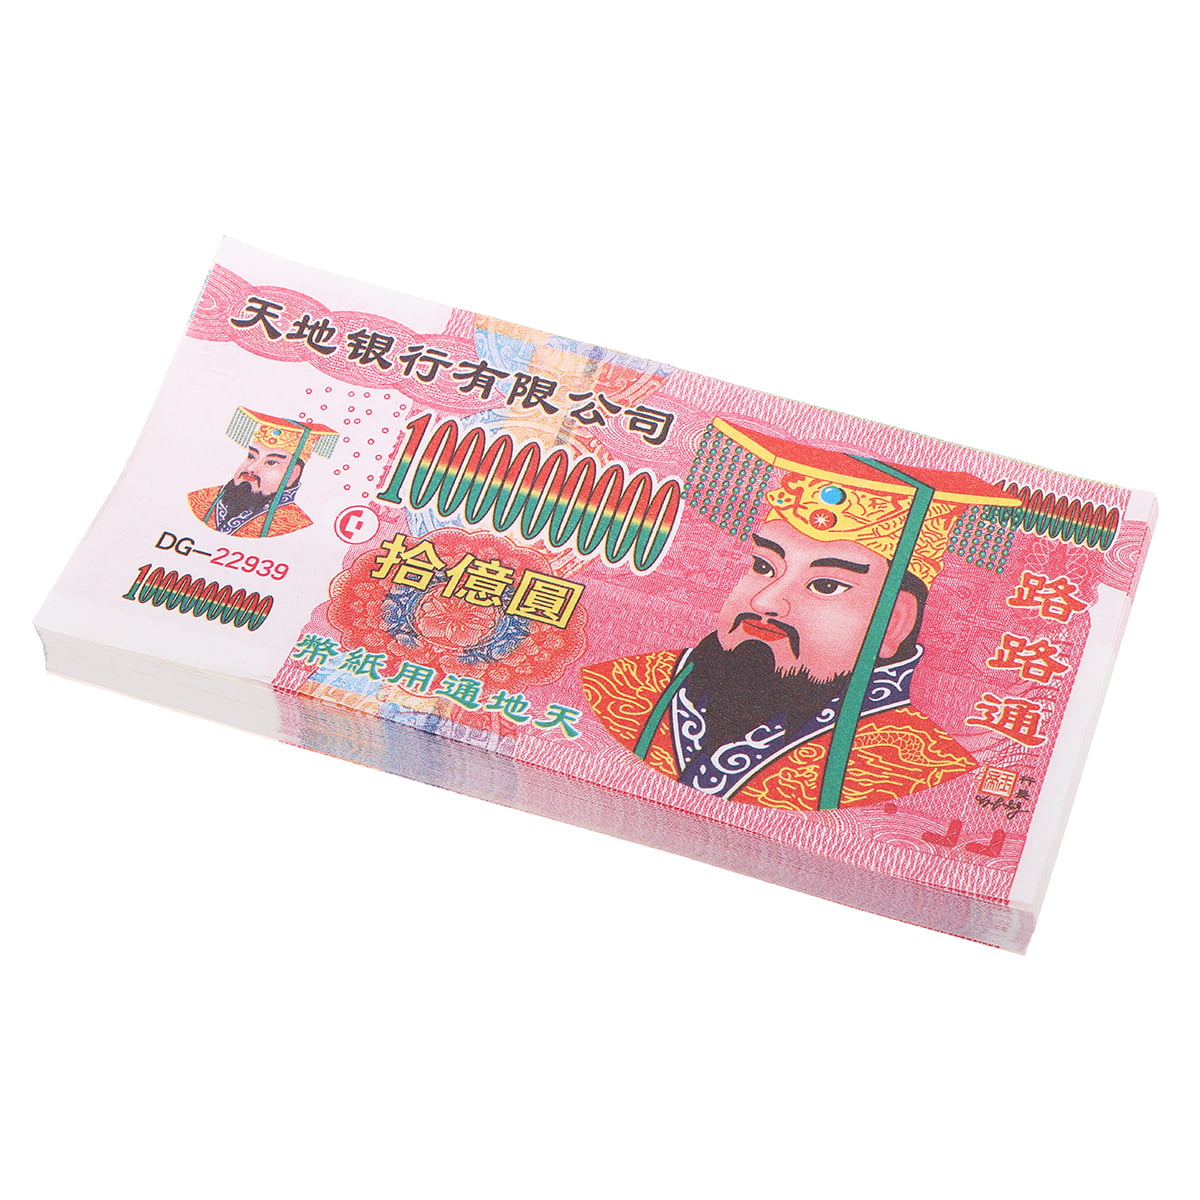 U.S Ancestor Money Dollar Strengthen Connection with Your Ancestors Bring Good Luck Wealth $1000 USD 160 Piece Joss Paper Heaven Bank Notes Ghost Money Chinese Joss Paper for Funeral 